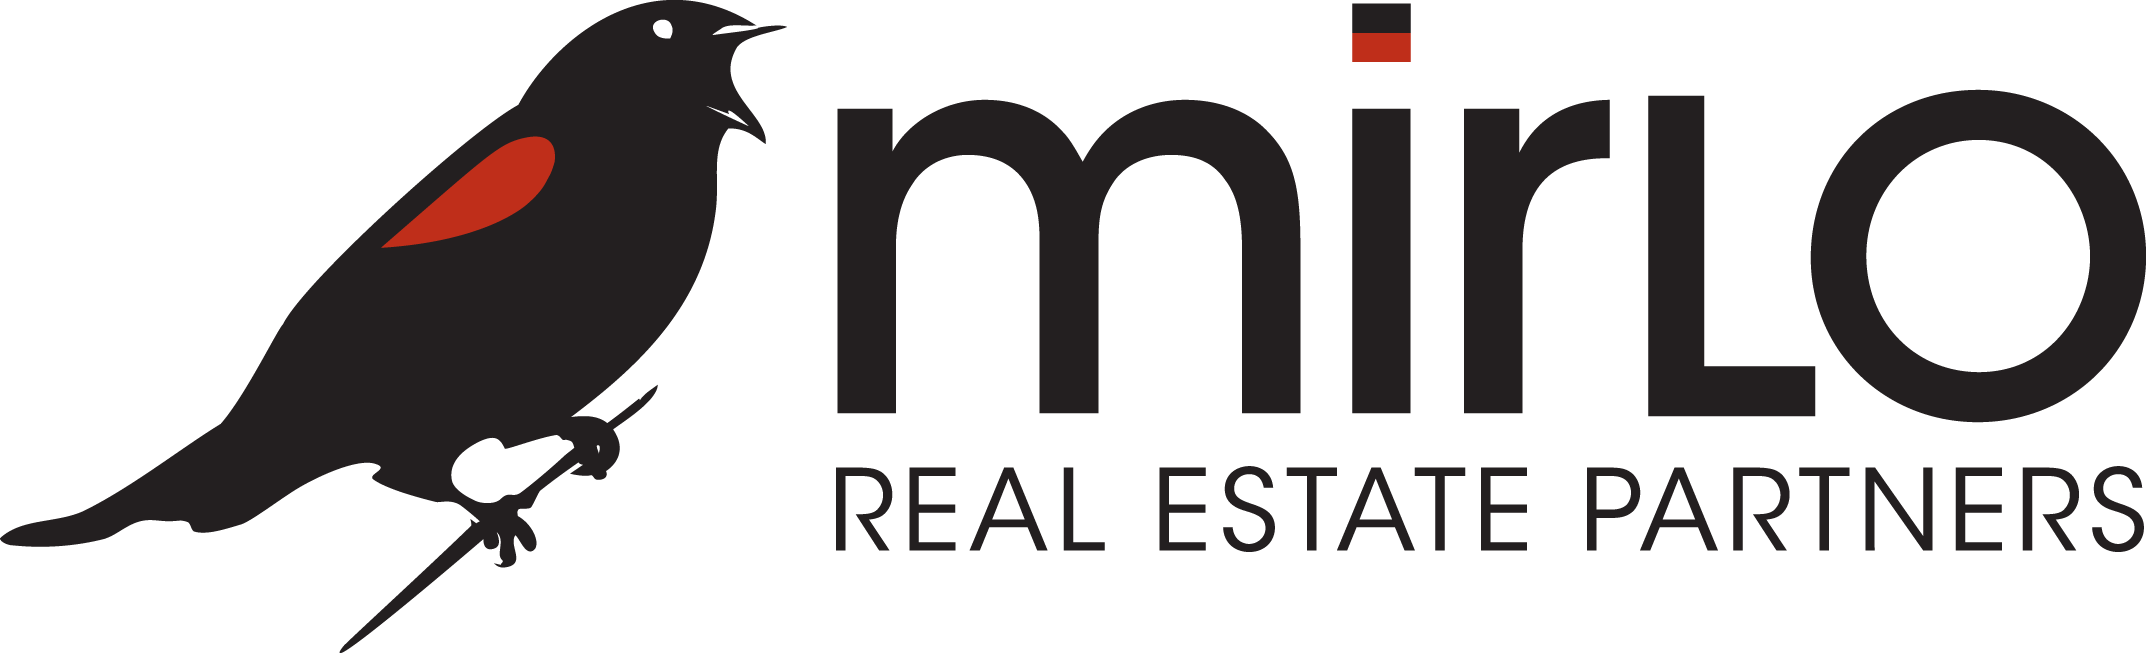 mirlo Real Estate Partners